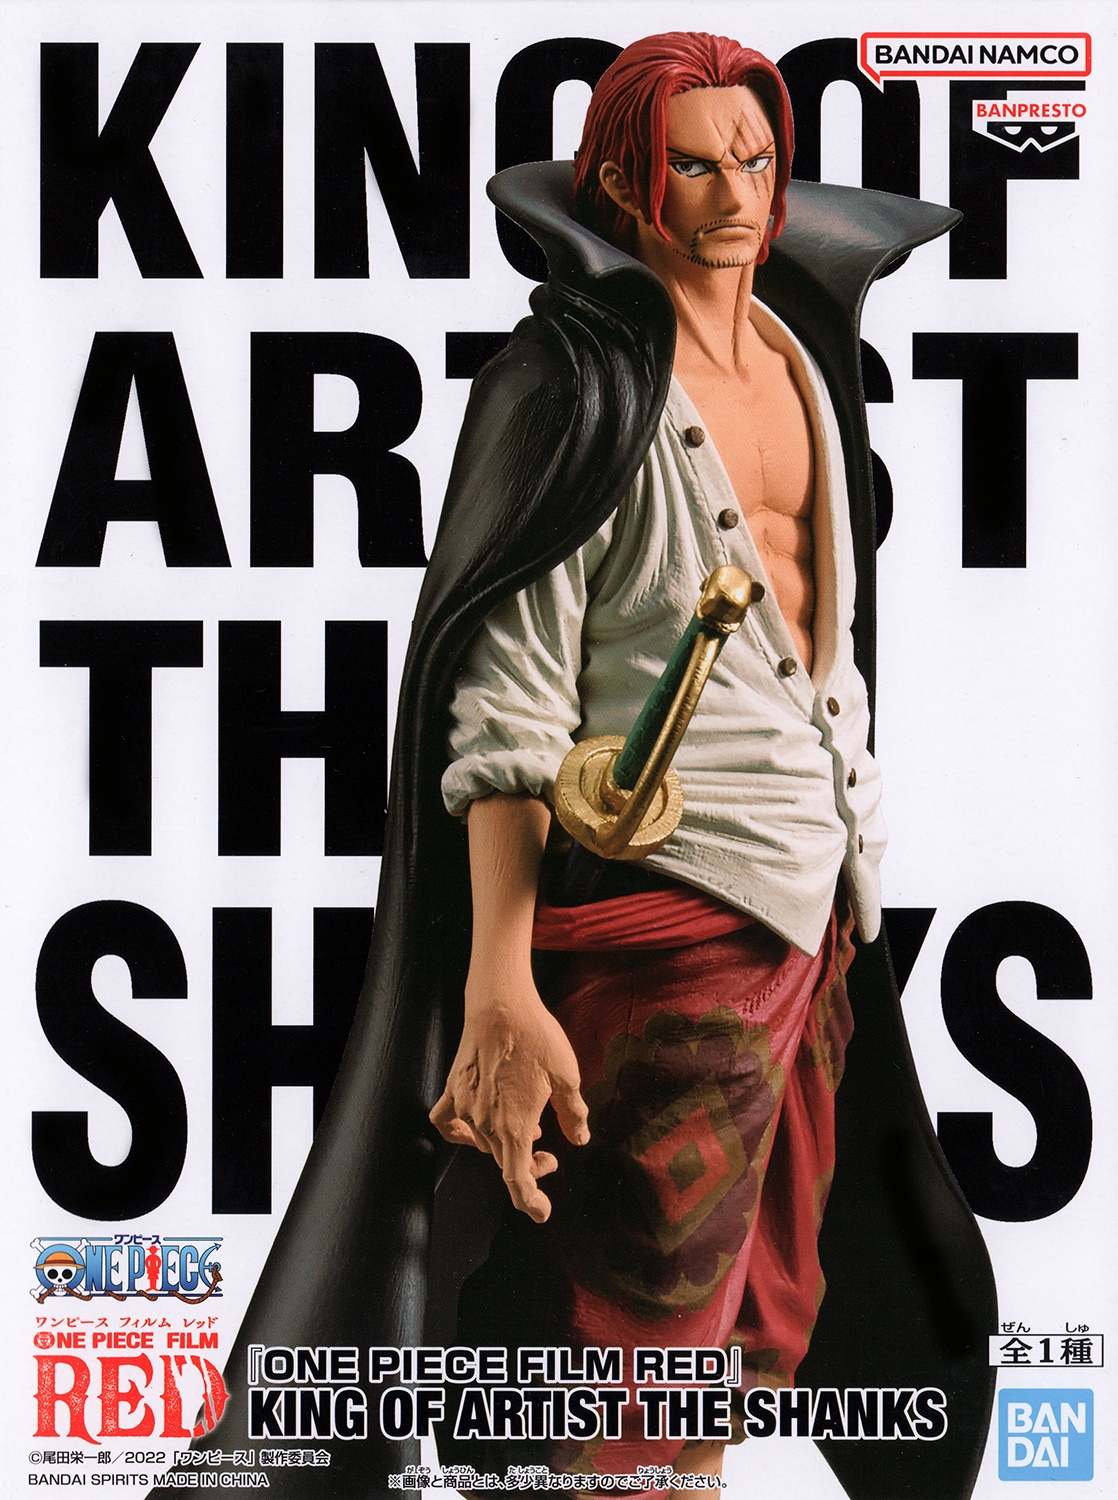 One Piece Film Red King of Artist The Shanks